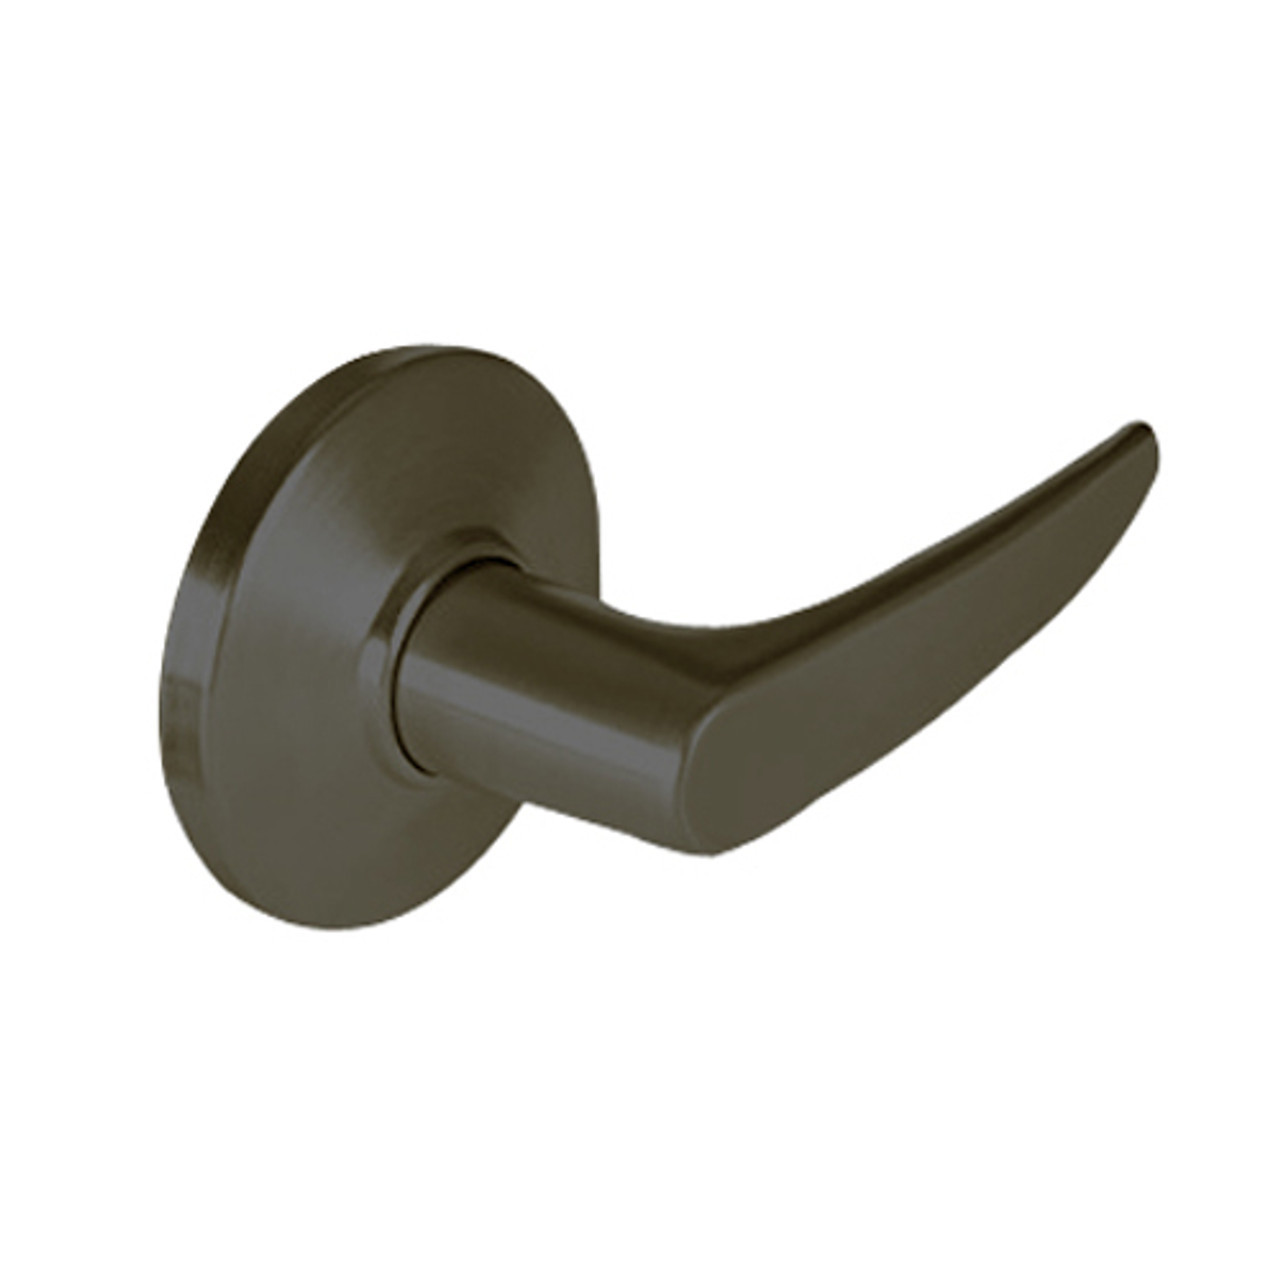 9K30Q16DSTK613LM Best 9K Series Exit Heavy Duty Cylindrical Lever Locks with Curved Without Return Lever Design in Oil Rubbed Bronze